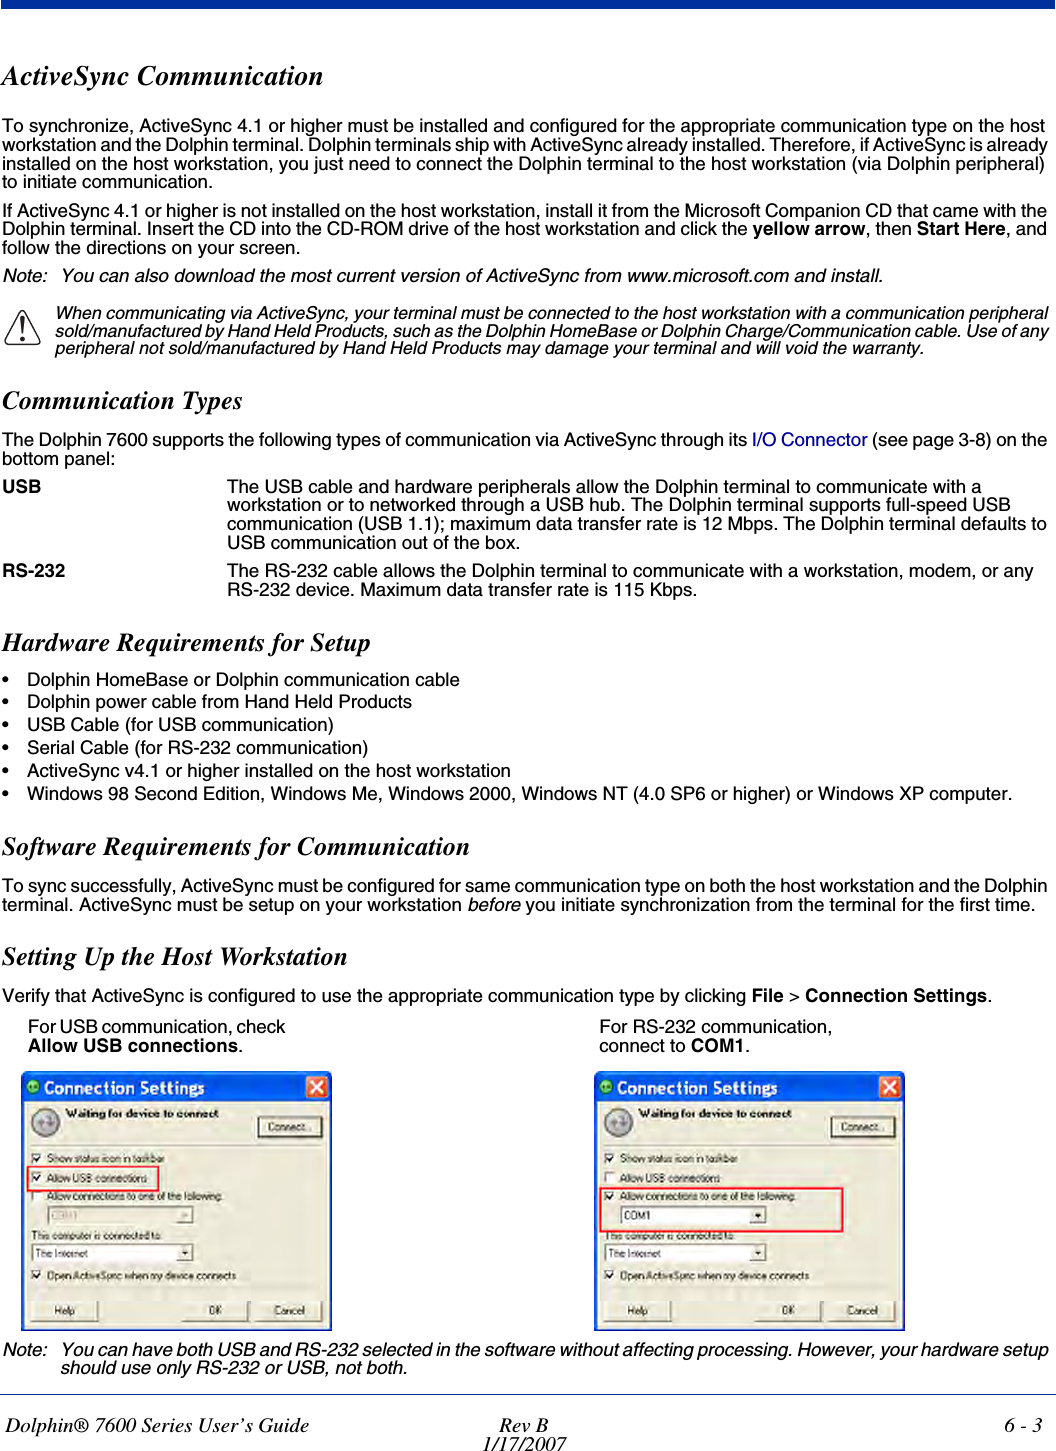 Dolphin® 7600 Series User’s Guide Rev B1/17/20076 - 3ActiveSync CommunicationTo synchronize, ActiveSync 4.1 or higher must be installed and configured for the appropriate communication type on the host workstation and the Dolphin terminal. Dolphin terminals ship with ActiveSync already installed. Therefore, if ActiveSync is already installed on the host workstation, you just need to connect the Dolphin terminal to the host workstation (via Dolphin peripheral) to initiate communication.If ActiveSync 4.1 or higher is not installed on the host workstation, install it from the Microsoft Companion CD that came with the Dolphin terminal. Insert the CD into the CD-ROM drive of the host workstation and click the yellow arrow, then Start Here, and follow the directions on your screen.Note: You can also download the most current version of ActiveSync from www.microsoft.com and install.When communicating via ActiveSync, your terminal must be connected to the host workstation with a communication peripheral sold/manufactured by Hand Held Products, such as the Dolphin HomeBase or Dolphin Charge/Communication cable. Use of any peripheral not sold/manufactured by Hand Held Products may damage your terminal and will void the warranty.Communication TypesThe Dolphin 7600 supports the following types of communication via ActiveSync through its I/O Connector (see page 3-8) on the bottom panel:USB The USB cable and hardware peripherals allow the Dolphin terminal to communicate with a workstation or to networked through a USB hub. The Dolphin terminal supports full-speed USB communication (USB 1.1); maximum data transfer rate is 12 Mbps. The Dolphin terminal defaults to USB communication out of the box.RS-232 The RS-232 cable allows the Dolphin terminal to communicate with a workstation, modem, or any RS-232 device. Maximum data transfer rate is 115 Kbps.Hardware Requirements for Setup• Dolphin HomeBase or Dolphin communication cable • Dolphin power cable from Hand Held Products• USB Cable (for USB communication)• Serial Cable (for RS-232 communication)• ActiveSync v4.1 or higher installed on the host workstation• Windows 98 Second Edition, Windows Me, Windows 2000, Windows NT (4.0 SP6 or higher) or Windows XP computer. Software Requirements for CommunicationTo sync successfully, ActiveSync must be configured for same communication type on both the host workstation and the Dolphin terminal. ActiveSync must be setup on your workstation before you initiate synchronization from the terminal for the first time.Setting Up the Host WorkstationVerify that ActiveSync is configured to use the appropriate communication type by clicking File &gt; Connection Settings.Note: You can have both USB and RS-232 selected in the software without affecting processing. However, your hardware setup should use only RS-232 or USB, not both.!For USB communication, check Allow USB connections.For RS-232 communication, connect to COM1.